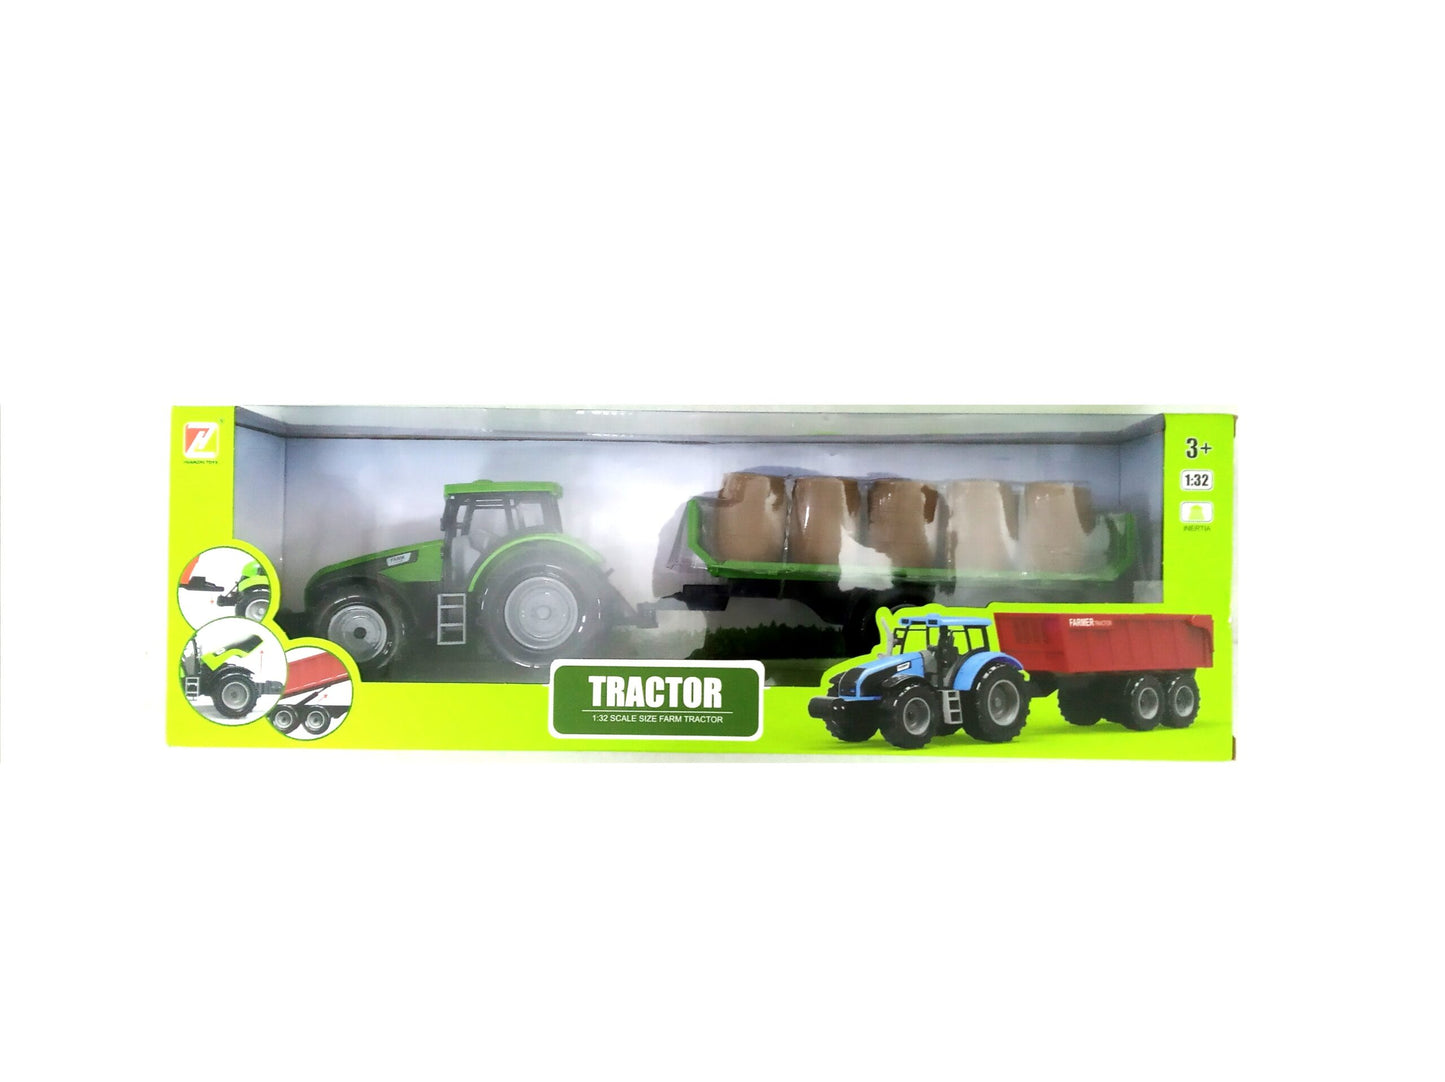 Kids Globe Green Tractor with green trailer 40 cm long 1:32